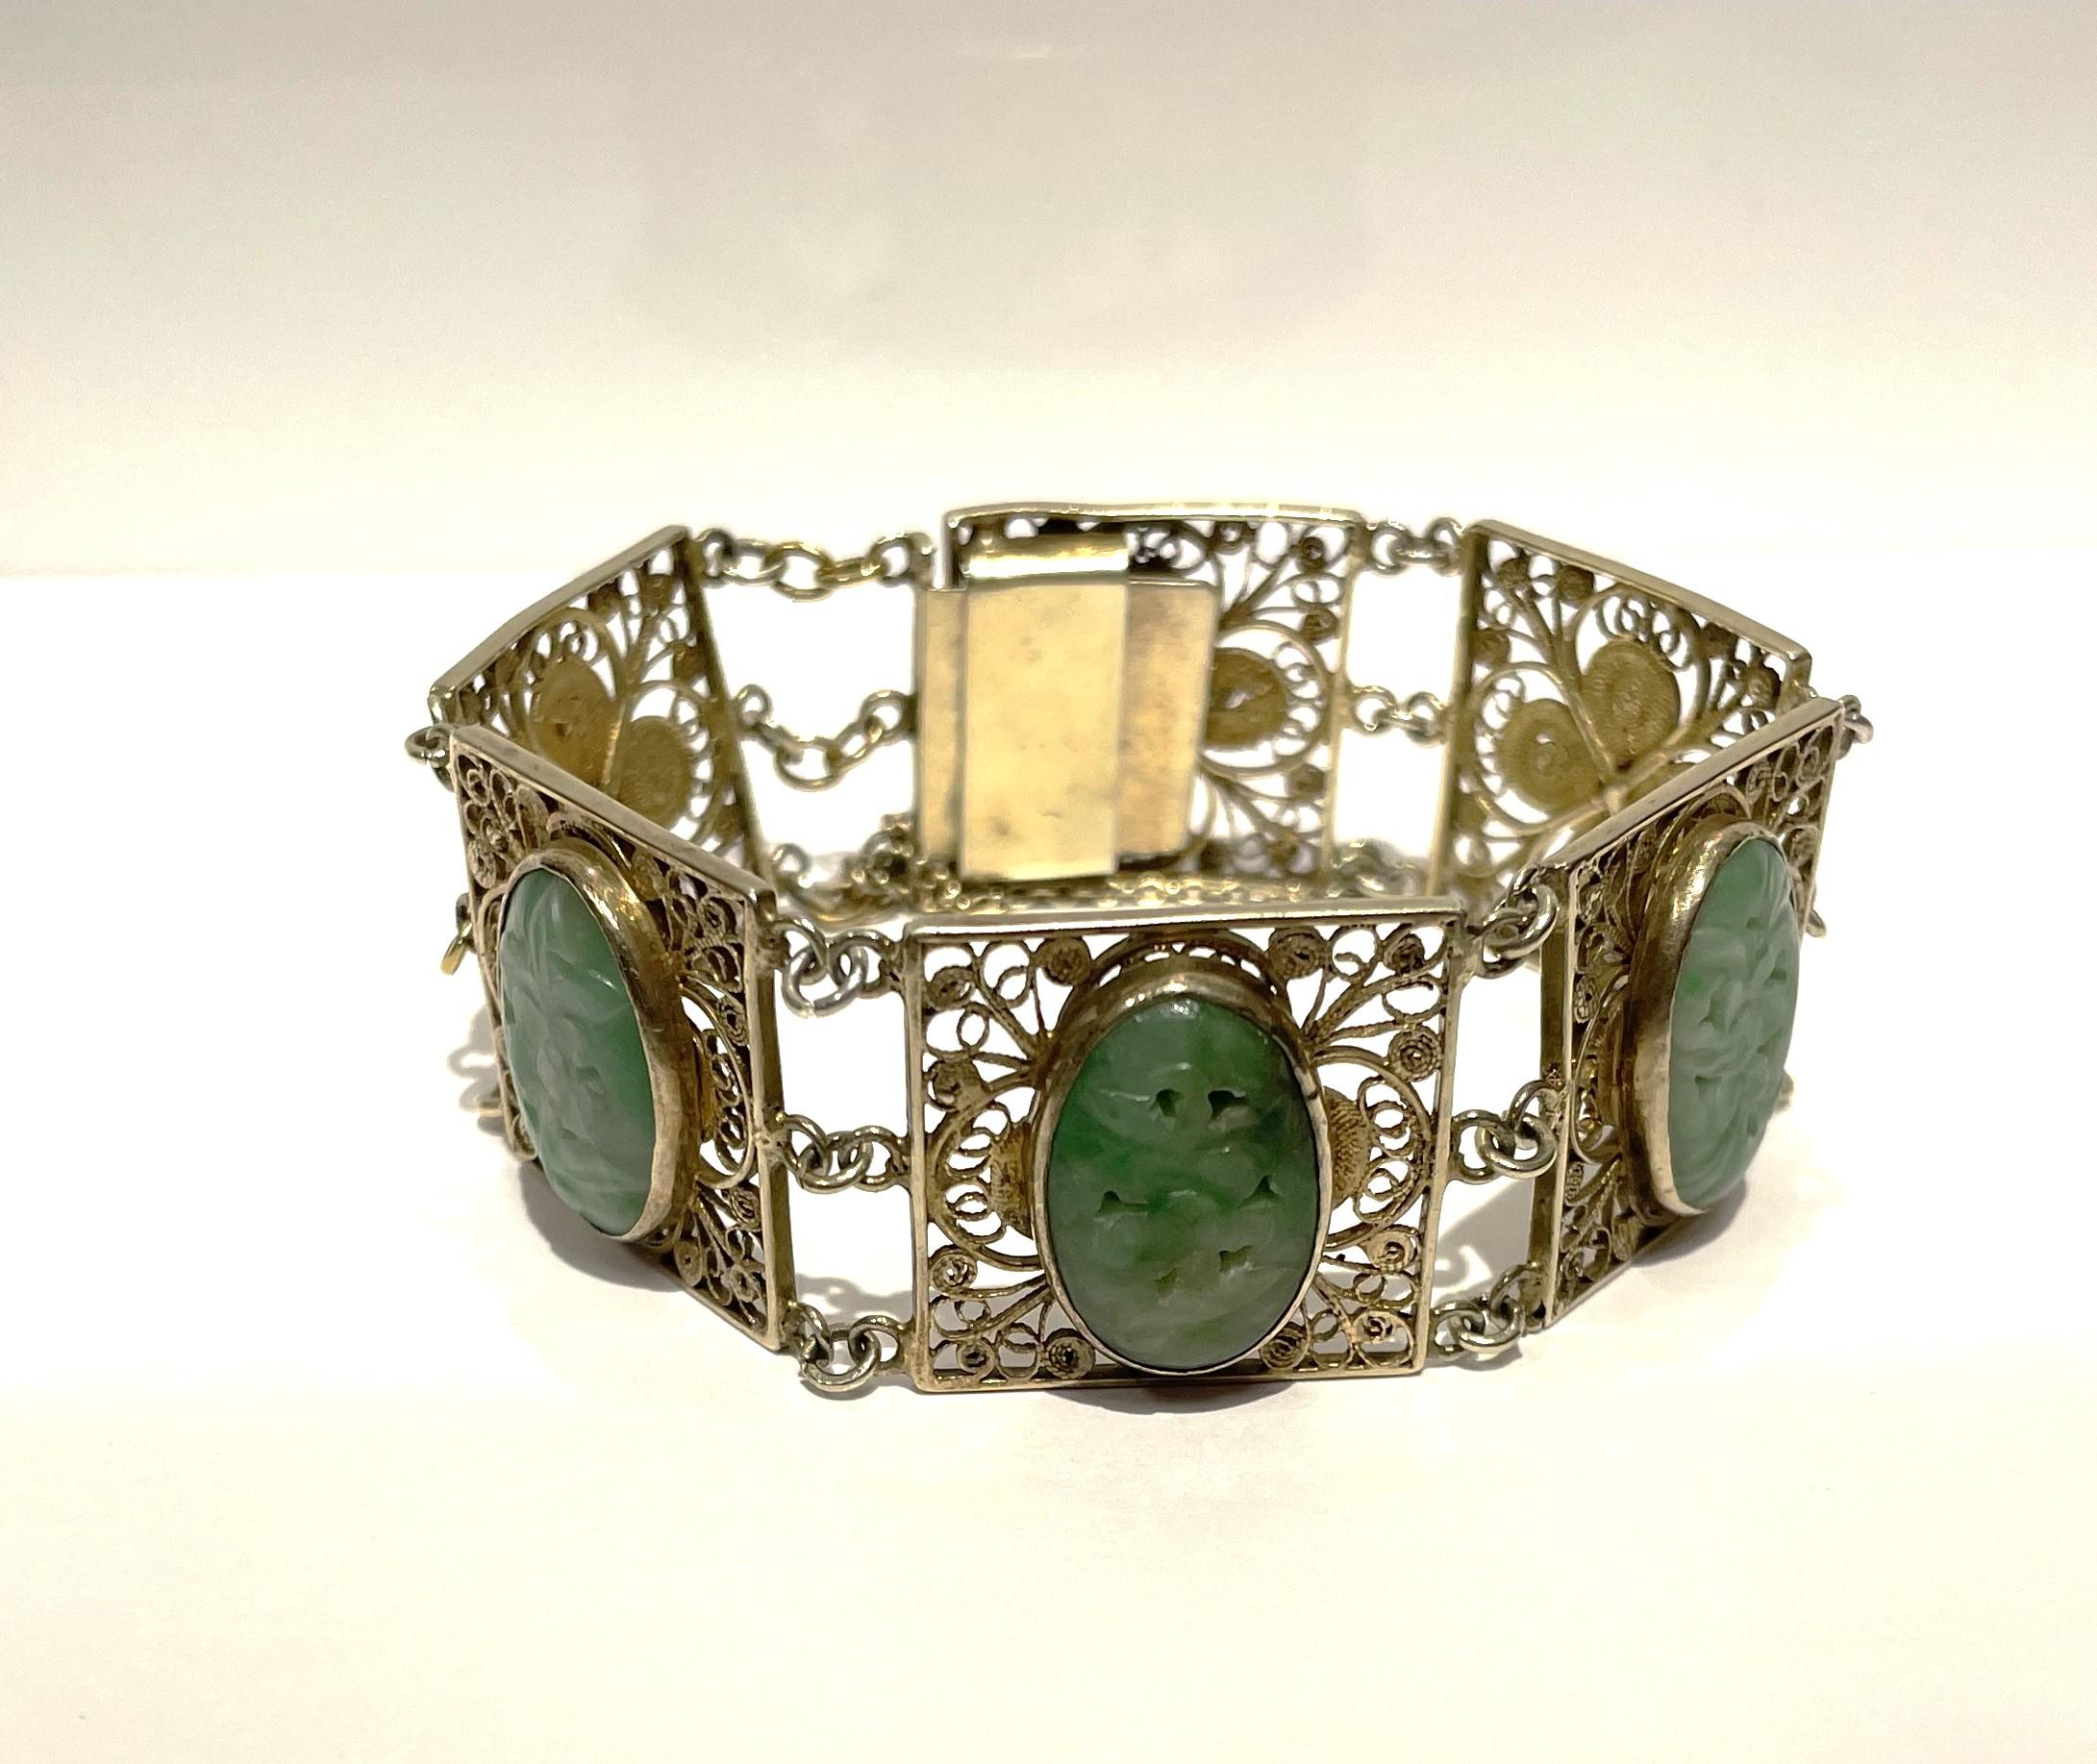 This piece is a one-of-a-kind gorgeous bracelet...a 